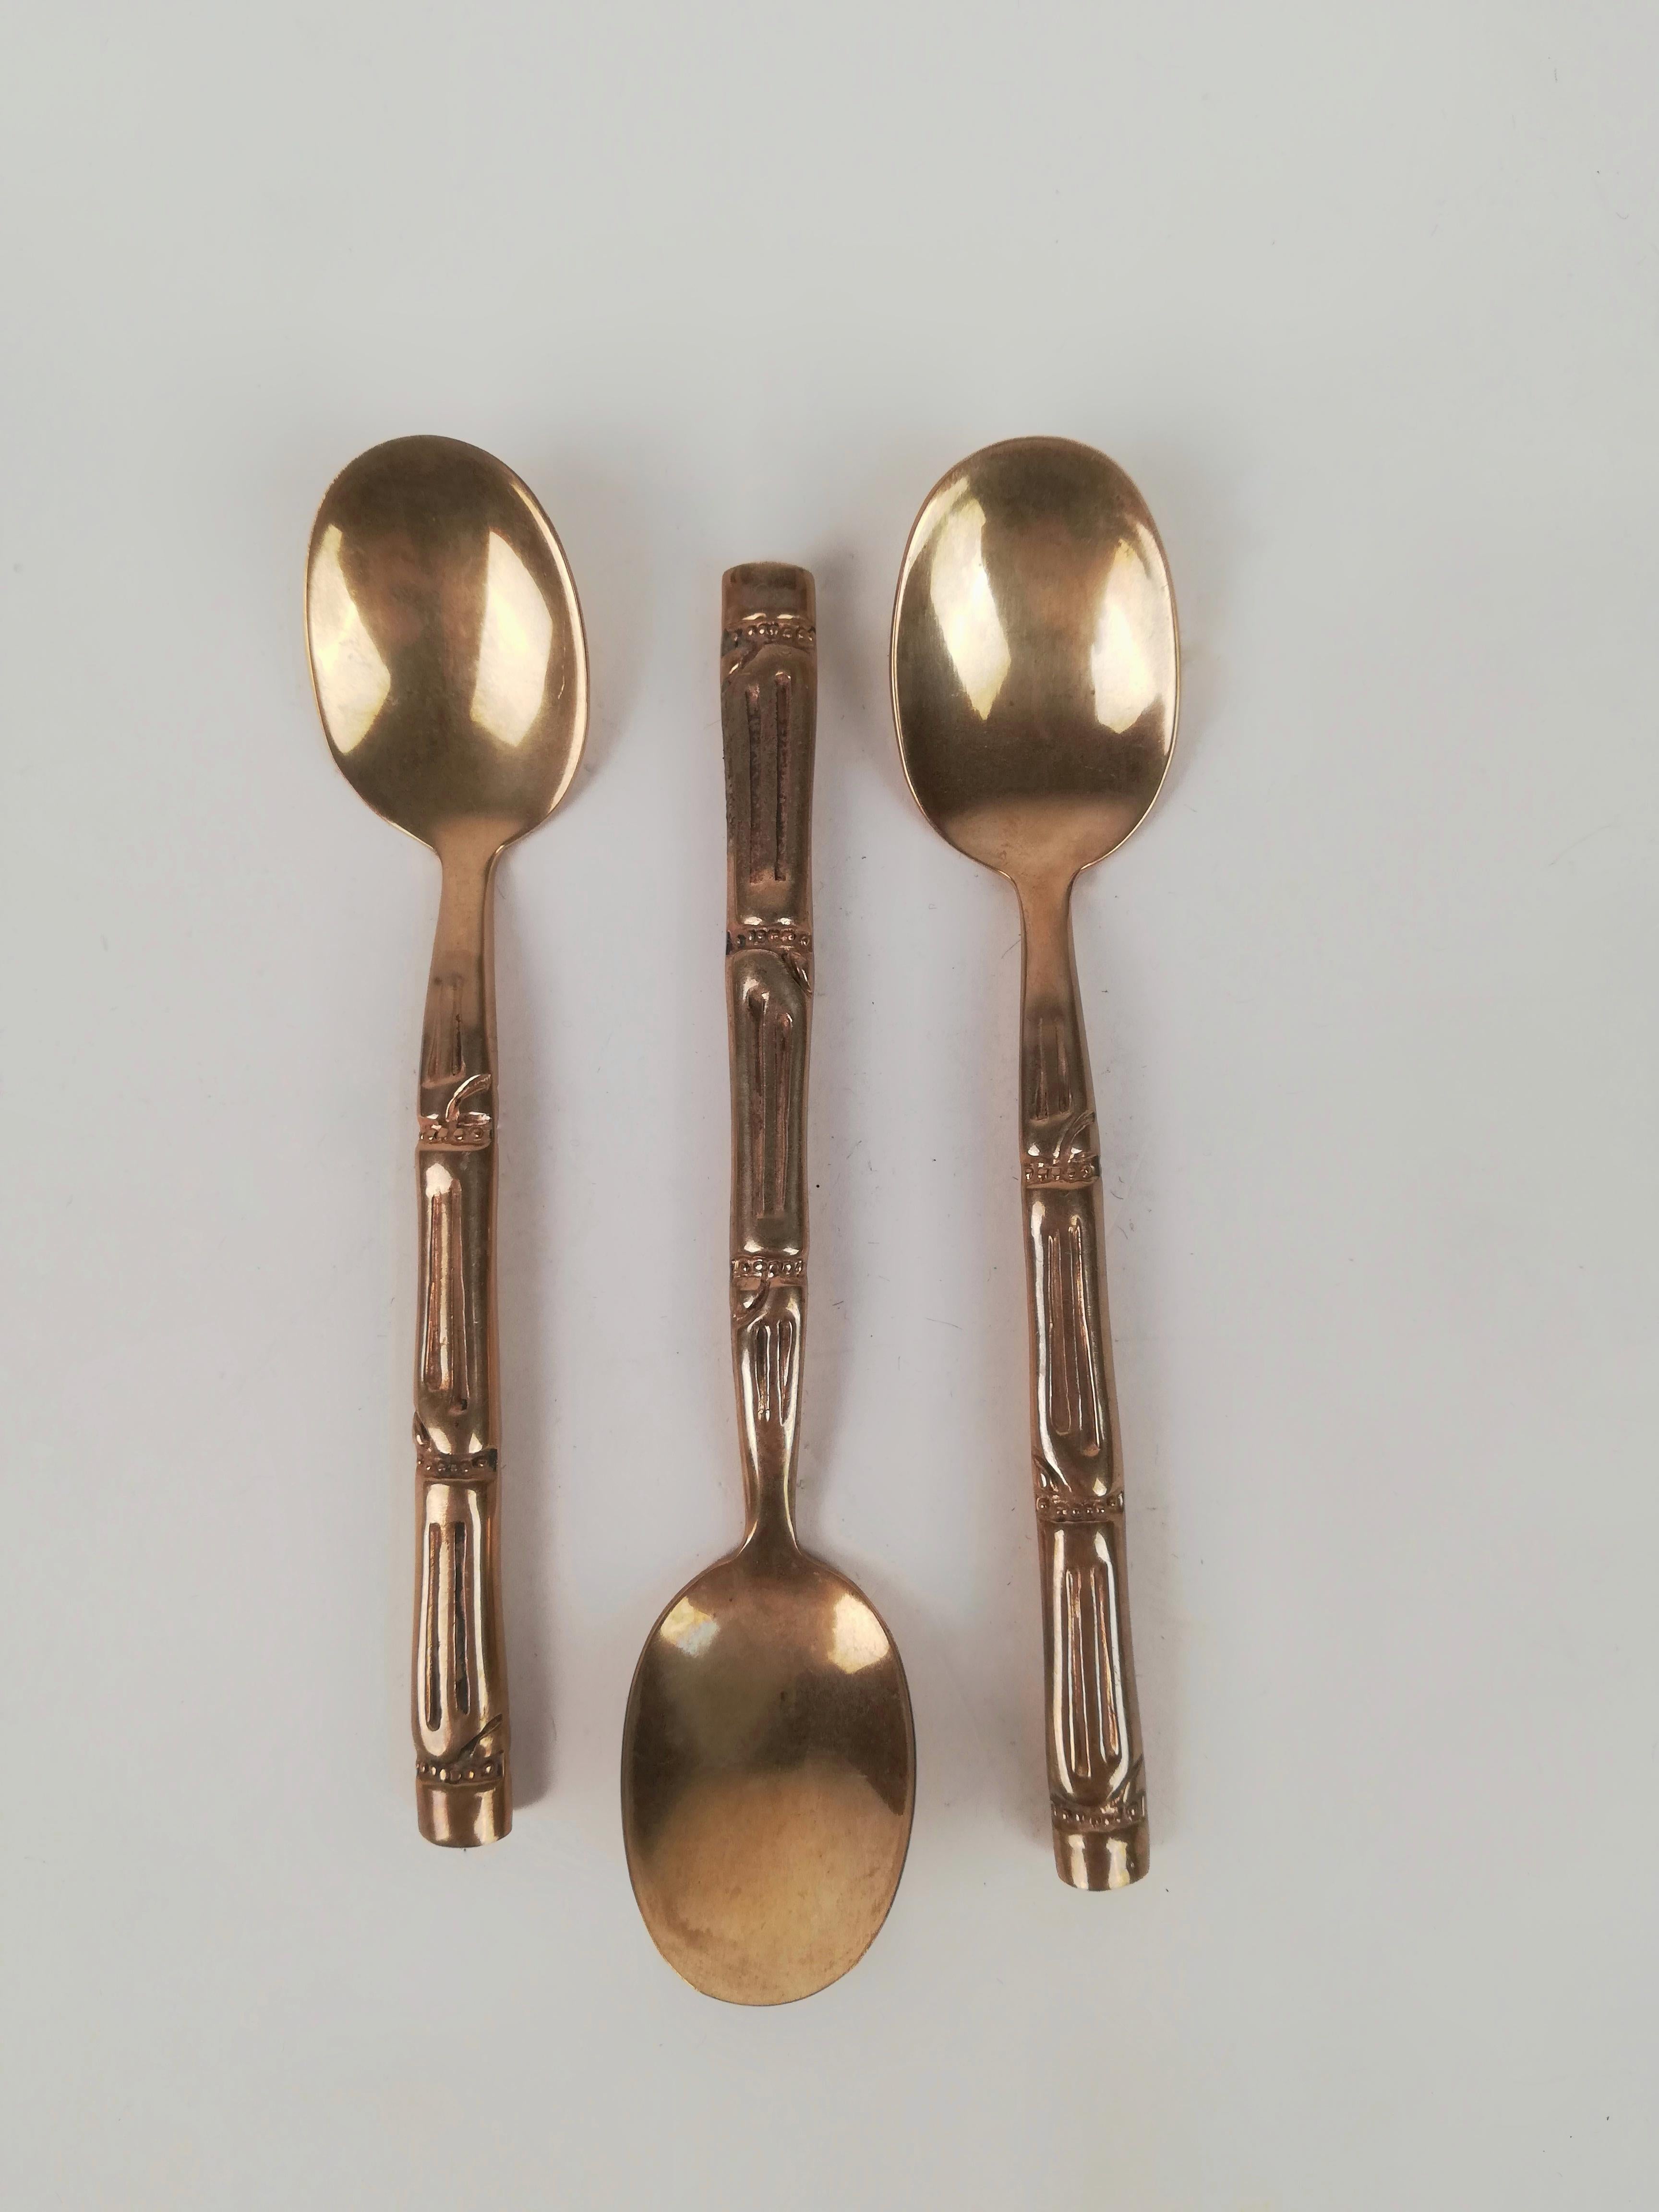 Vintage Cutlery Set in Hollywood Regency Style made in Brass Faux Bamboo, 1970s For Sale 5